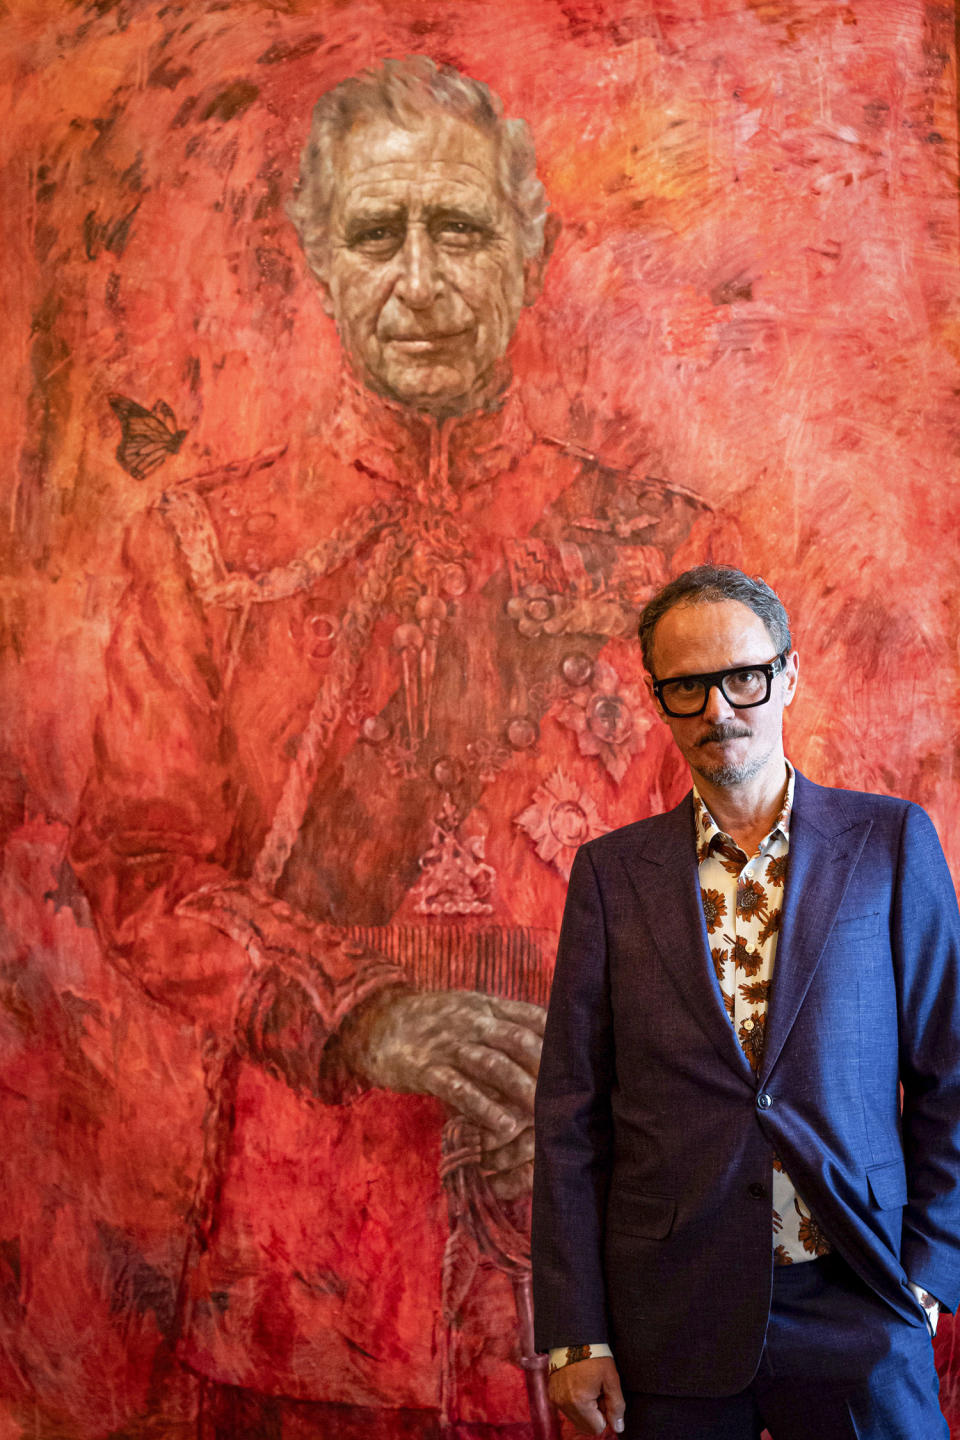 Artist Jonathan Yeo in front of the portrait of King Charles. (Aaron Chown / AP)